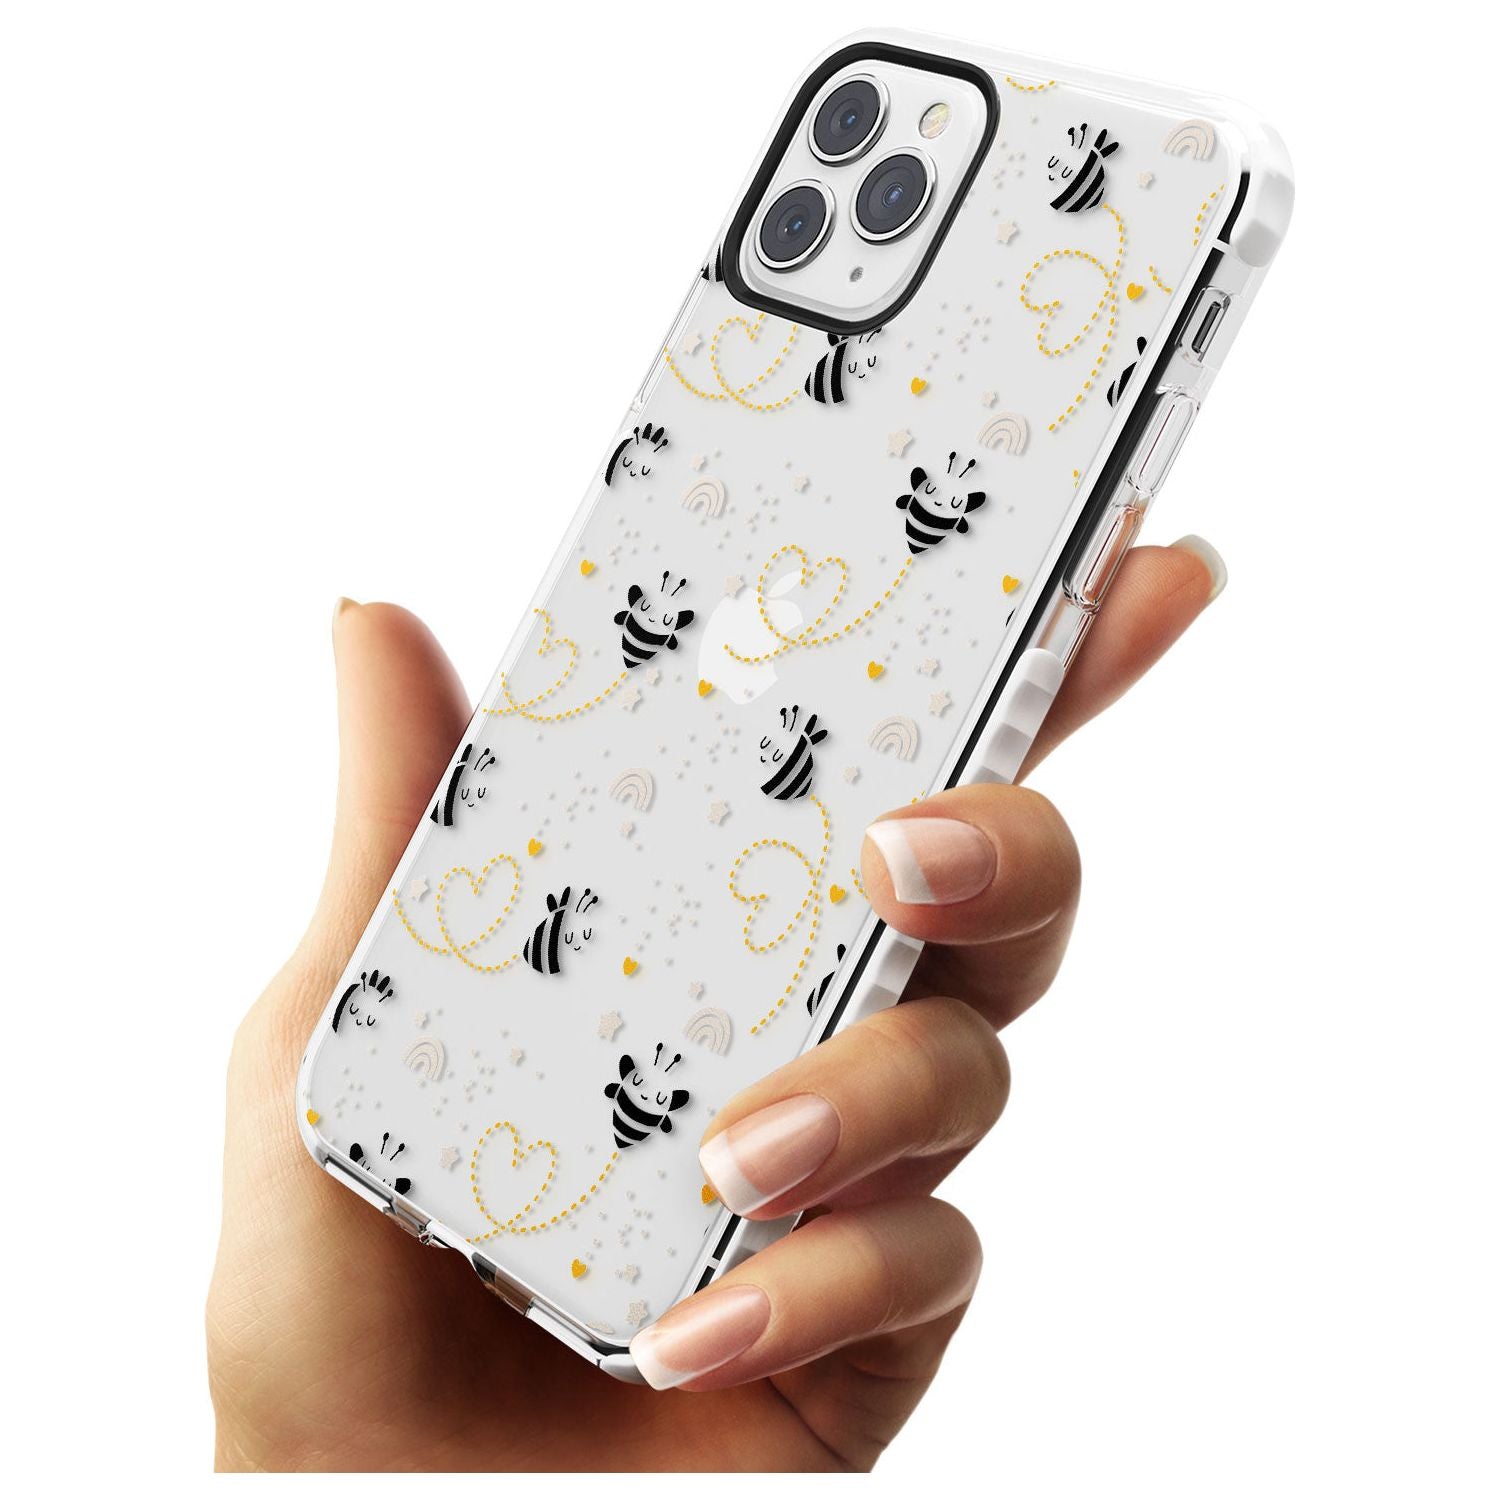 Sweet as Honey Patterns: Bees & Hearts (Clear) Impact Phone Case for iPhone 11 Pro Max